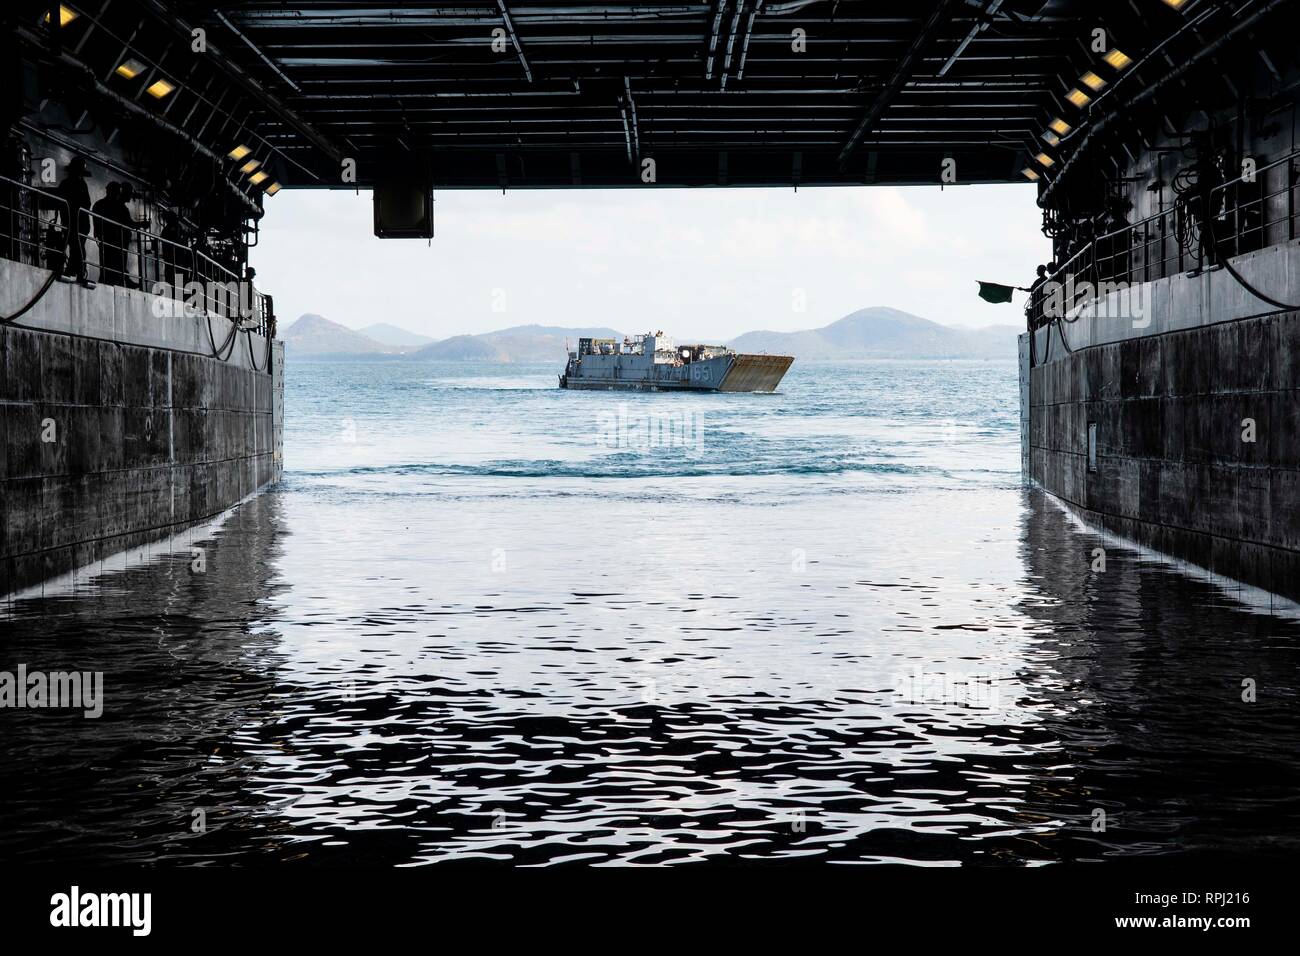 190221-N-DX072-1063 GULF OF THAILAND (Feb. 21, 2019) – Landing Craft, Utility (LCU) 1651, assigned to Naval Beach Unit (NBU) 7, approaches the well deck of the amphibious transport dock ship USS Green Bay (LPD 20). Green Bay, part of the Wasp Amphibious Ready Group, with embarked 31st Marine Expeditionary Unit (MEU), is in Thailand to participate in Exercise Cobra Gold 2019. Cobra Gold is a multinational exercise co-sponsored by Thailand and the United States that is designed to advance regional security and effective response to crisis contingencies through a robust multinational force to add Stock Photo